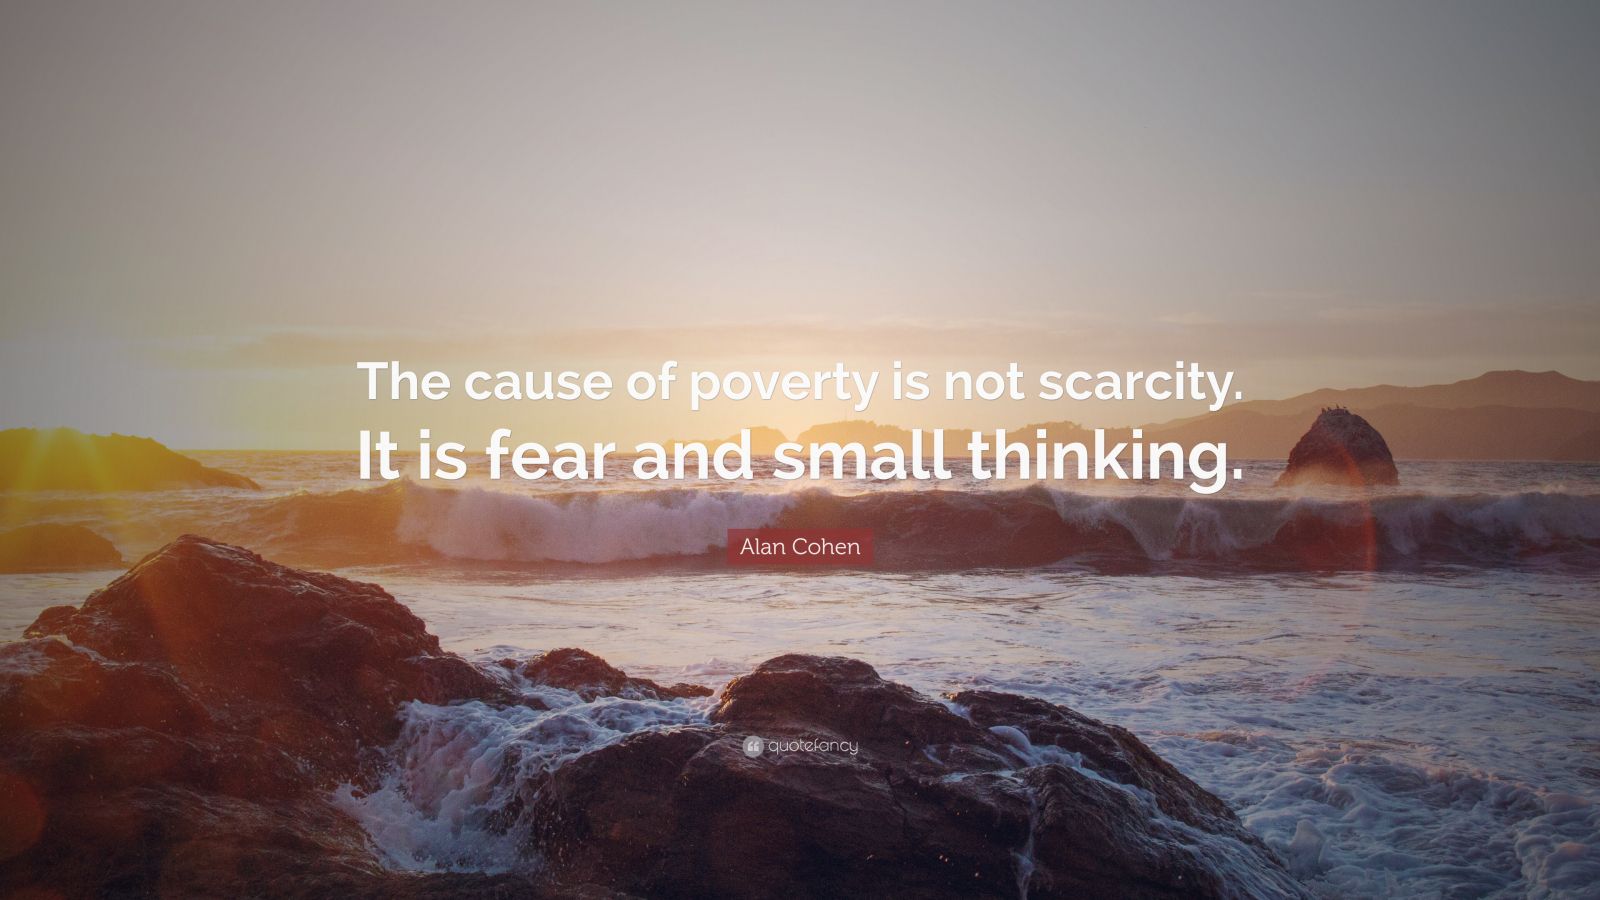 Alan Cohen Quote: “The cause of poverty is not scarcity. It is fear and ...